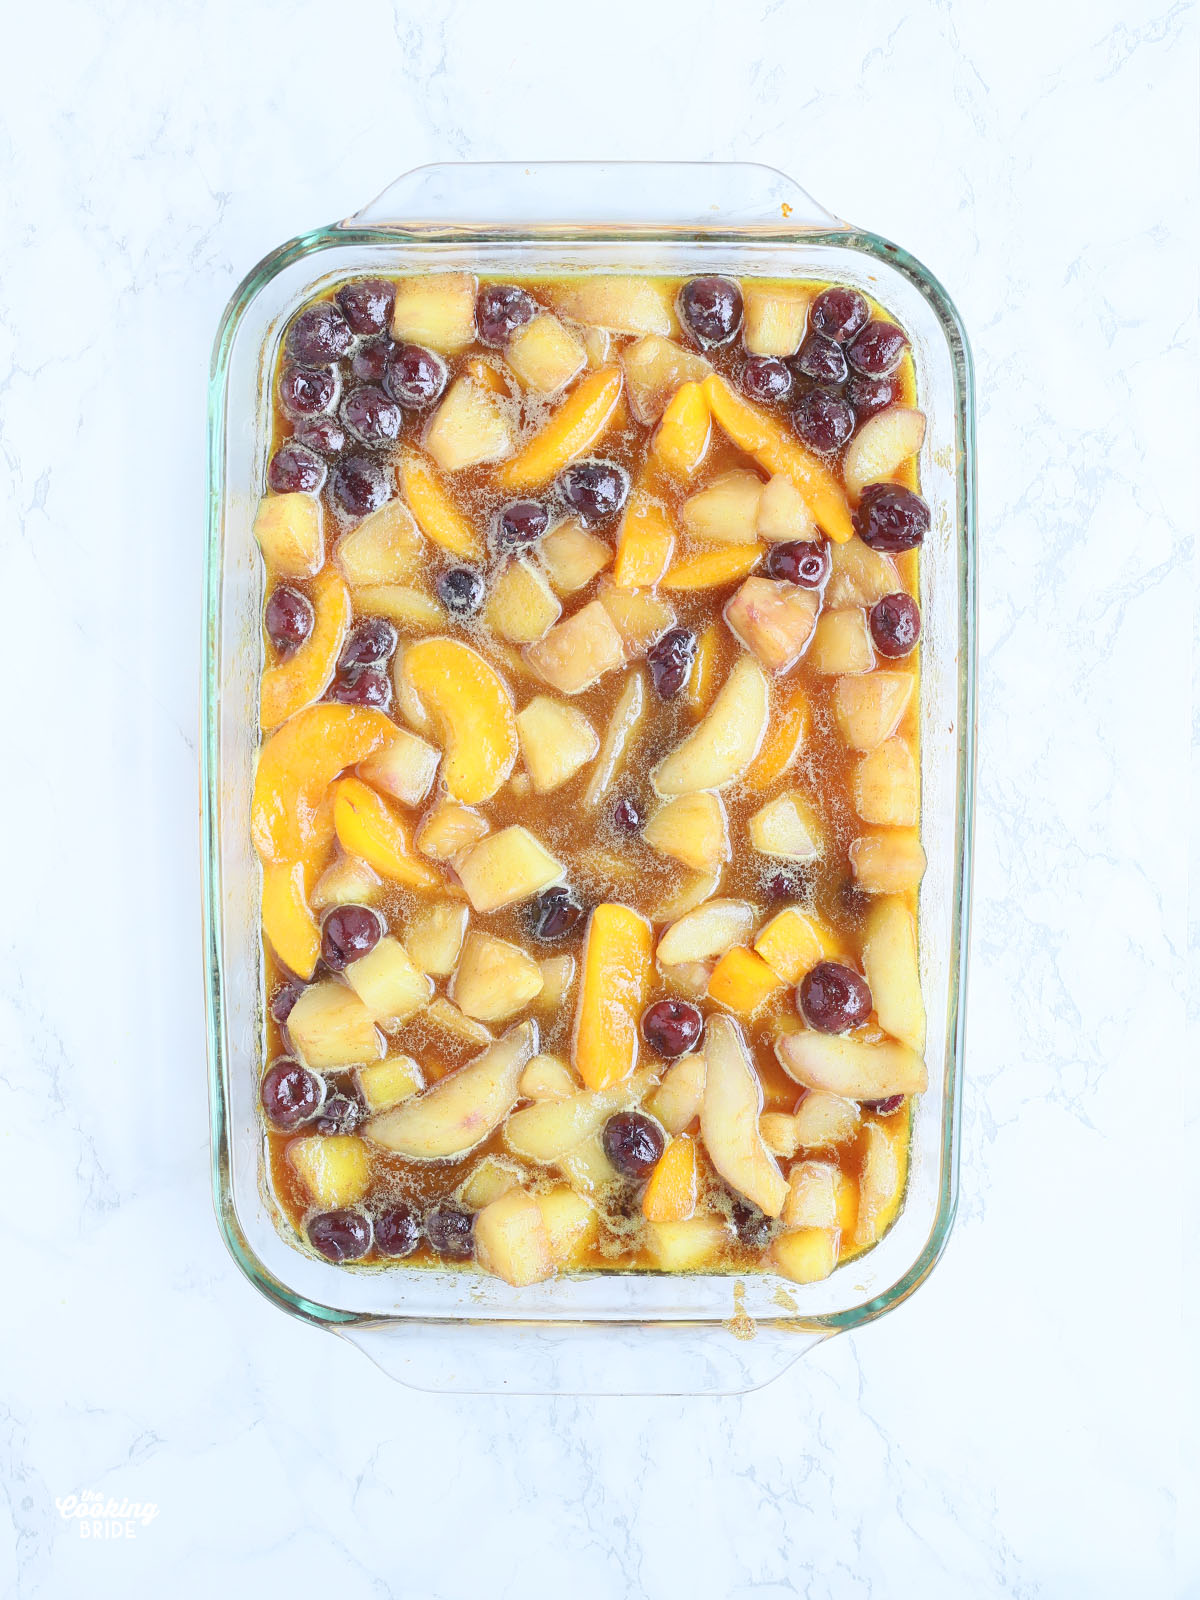 baked hot curried fruit in a glass casserole dish